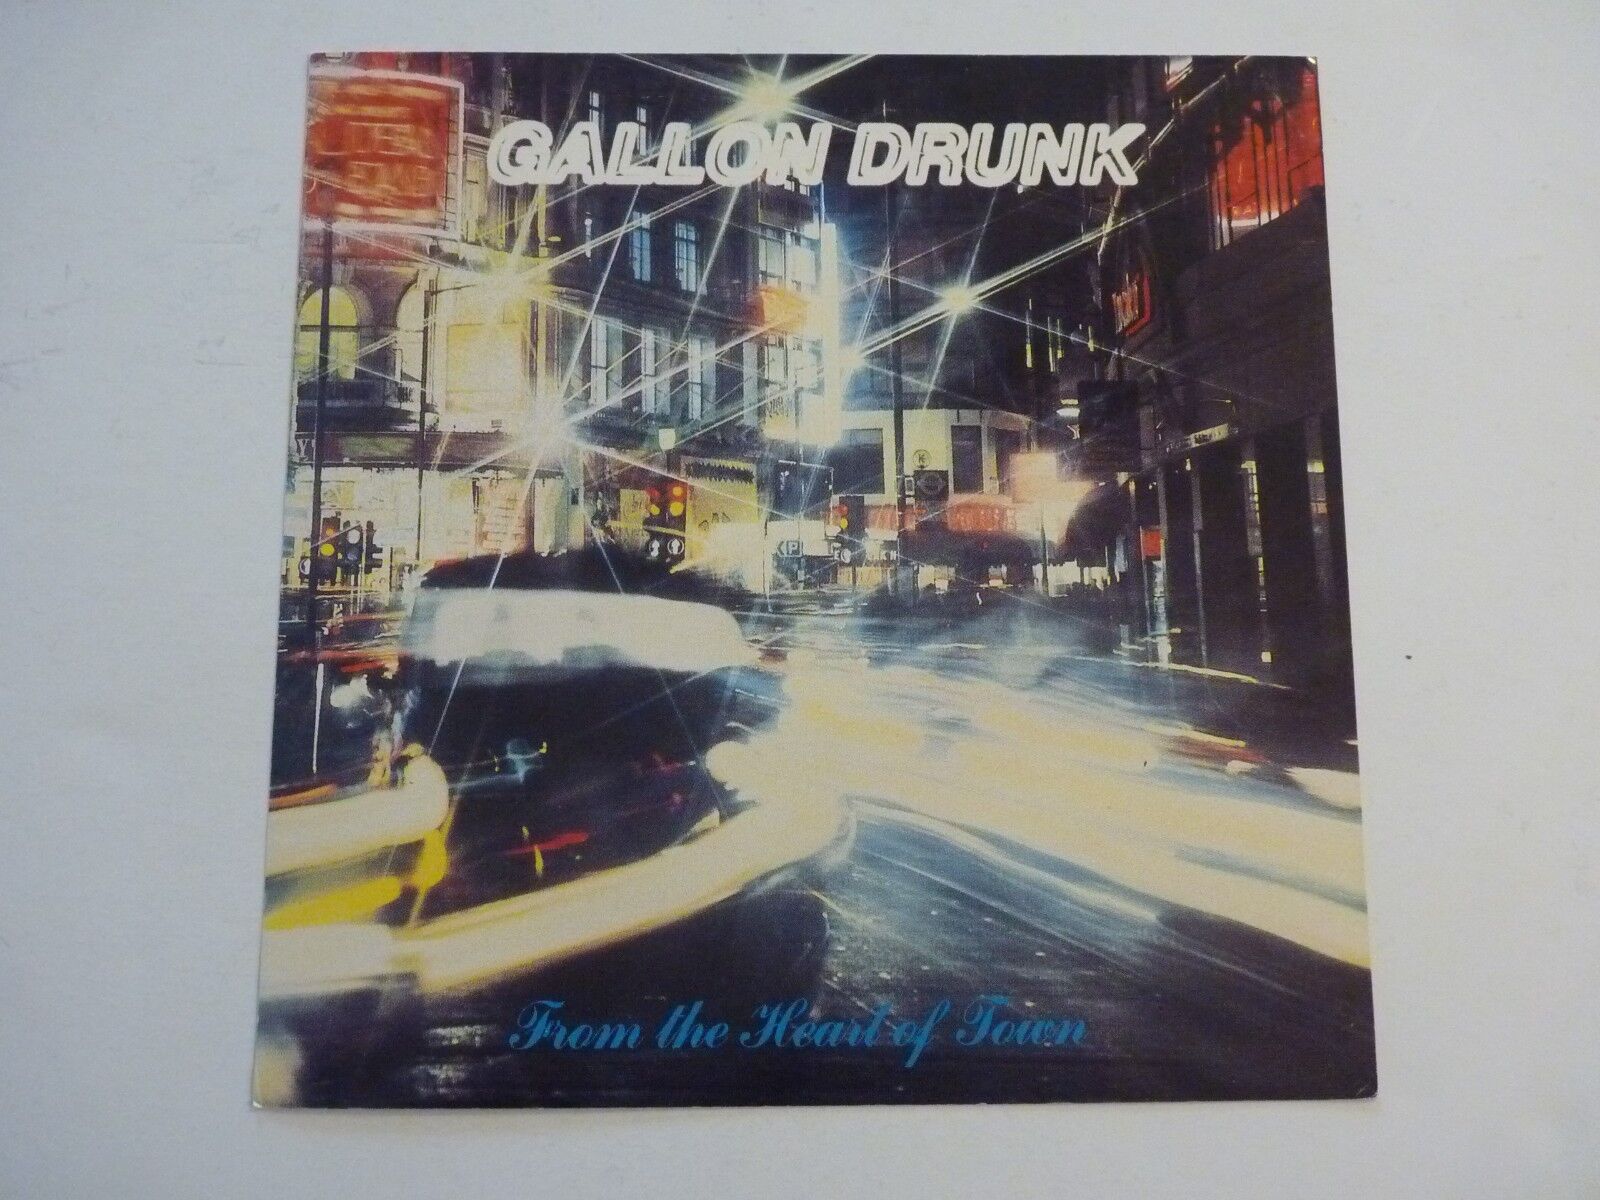 Gallon Drunk From the Heart of Town 1993 Promo LP Record Photo Poster painting Flat 12x12 Poster